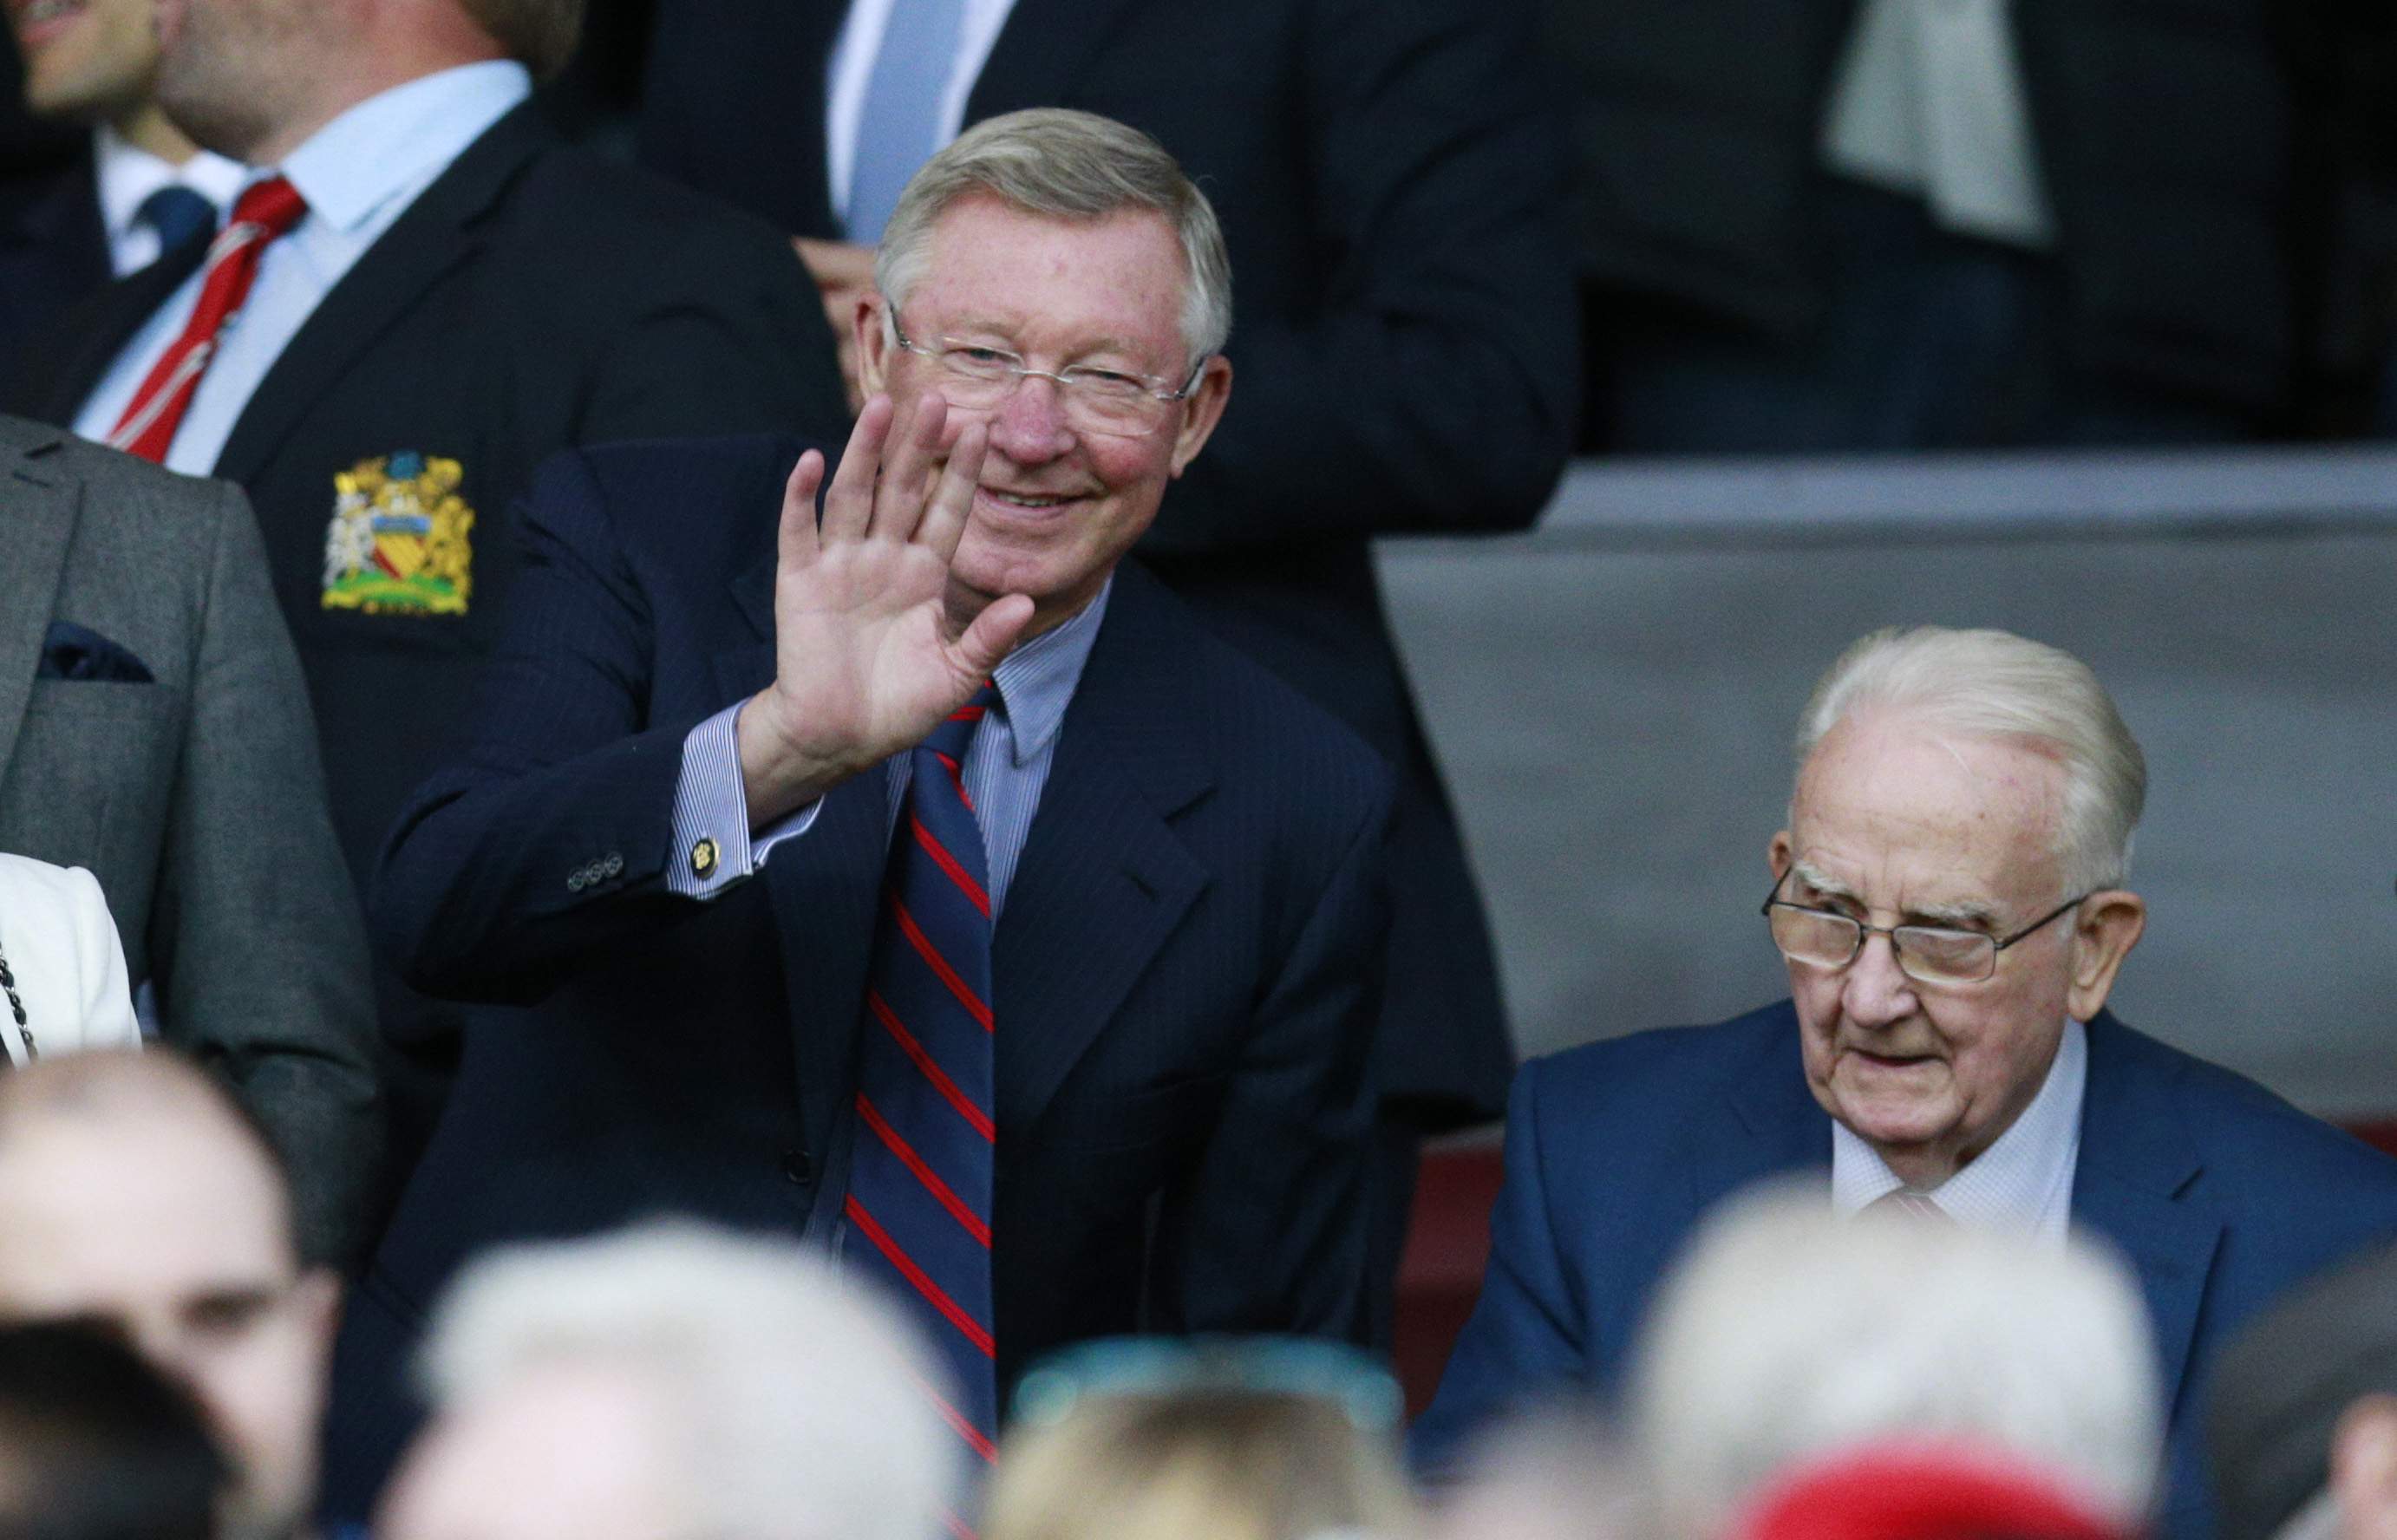 Football - Manchester United v Club Brugge - UEFA Champions League Qualifying Play-Off First Leg - Old Trafford, Manchester, England - 18/8/15 Sir Alex Ferguson in the stands before the match Action Images via Reuters / Jason Cairnduff Livepic EDITORIAL USE ONLY.